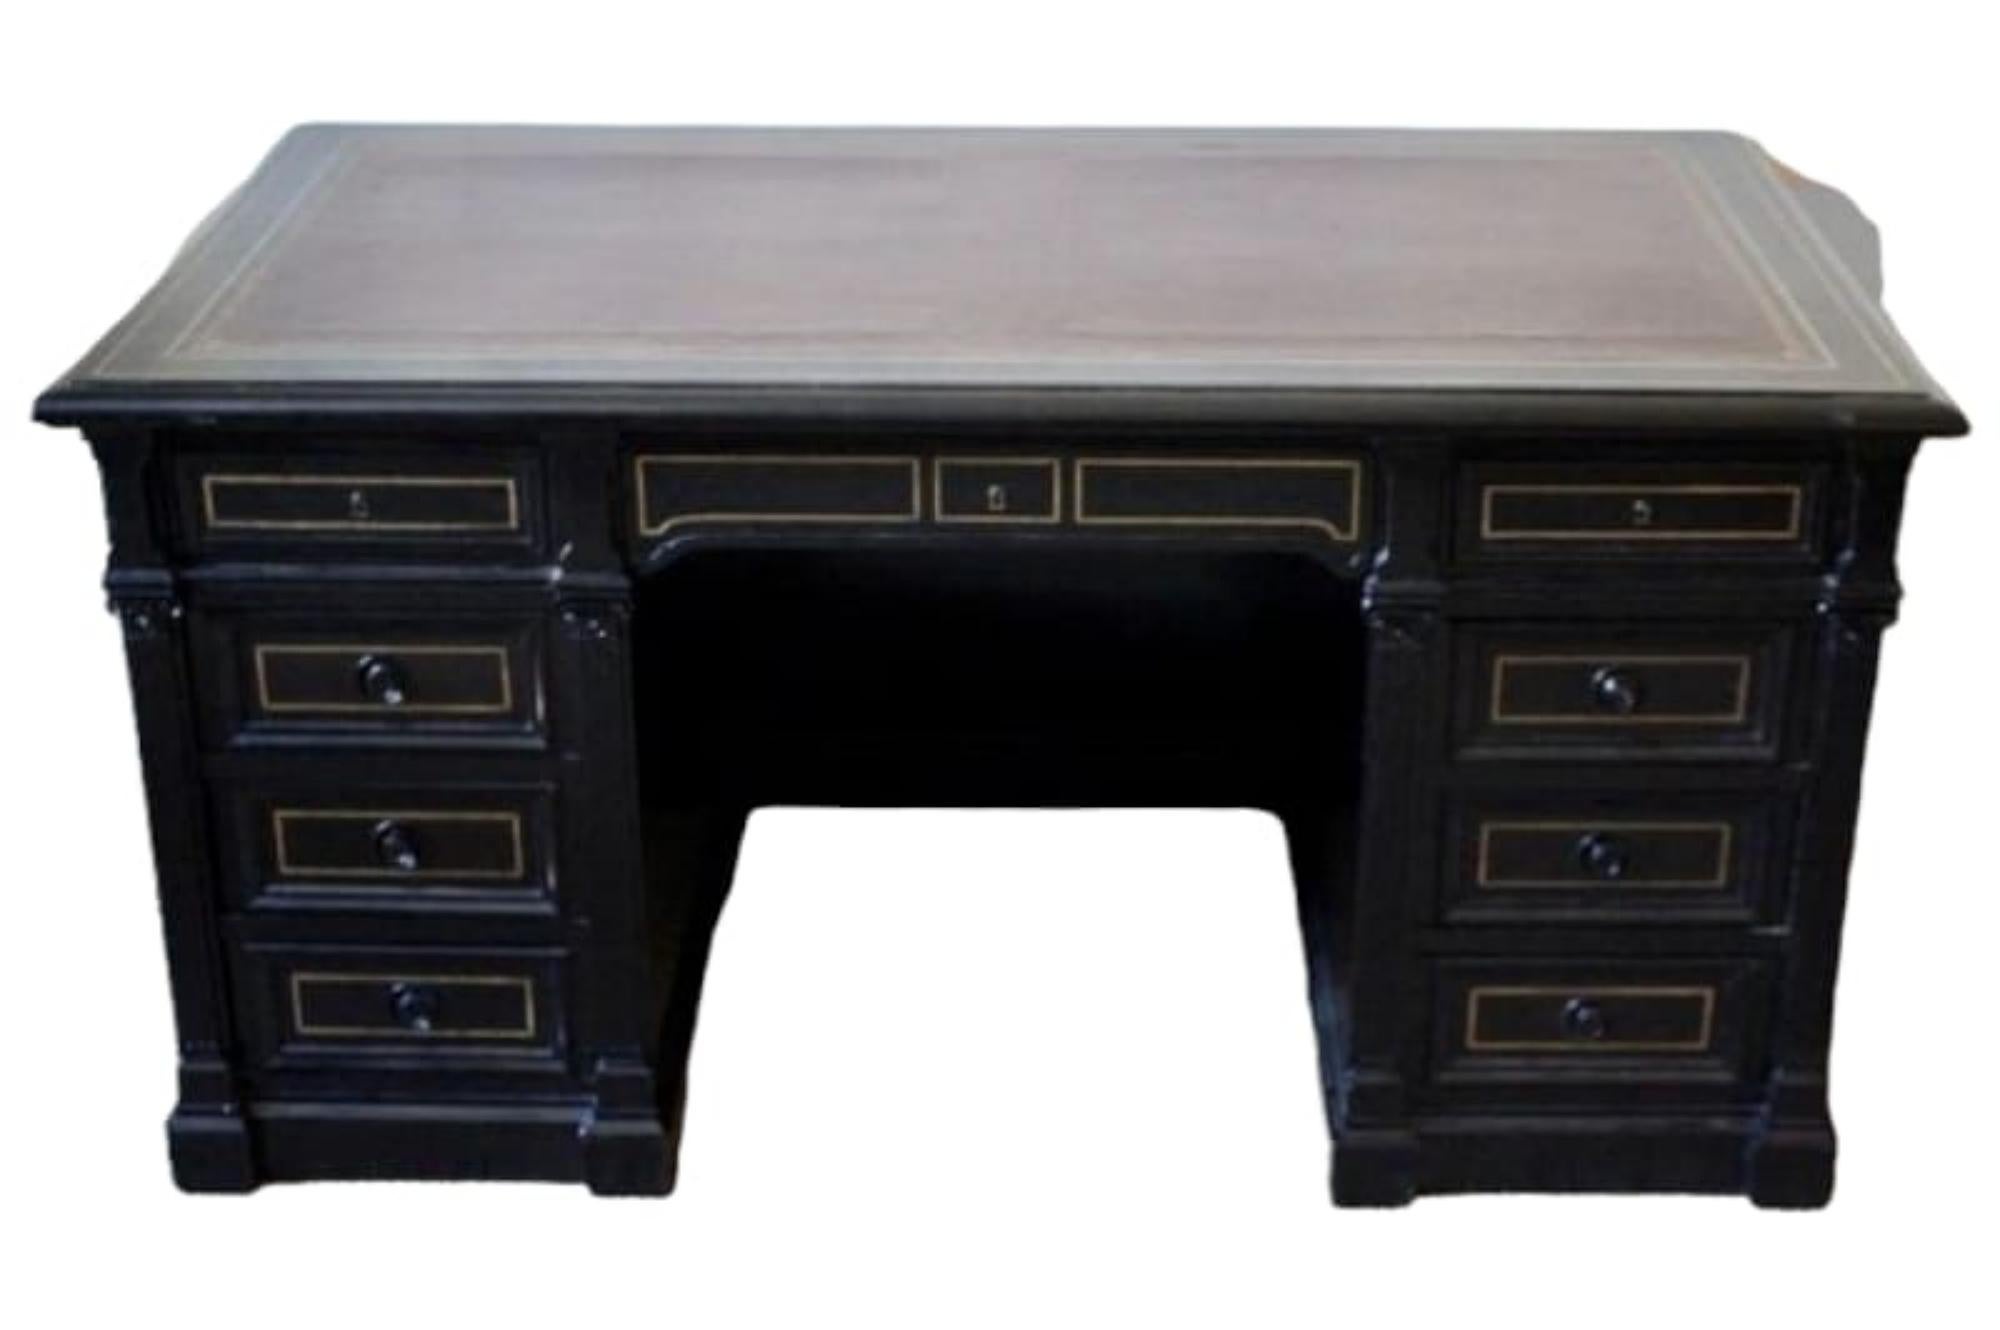 Late 19th century ebonised and brass inlay desk by Maison Krieger.
A good quality and of elegant proportions, late 19th century French Ebonized desk with brass inlay and two brushing slides , by Maison Krieger.

Measures: Width: 145cm /